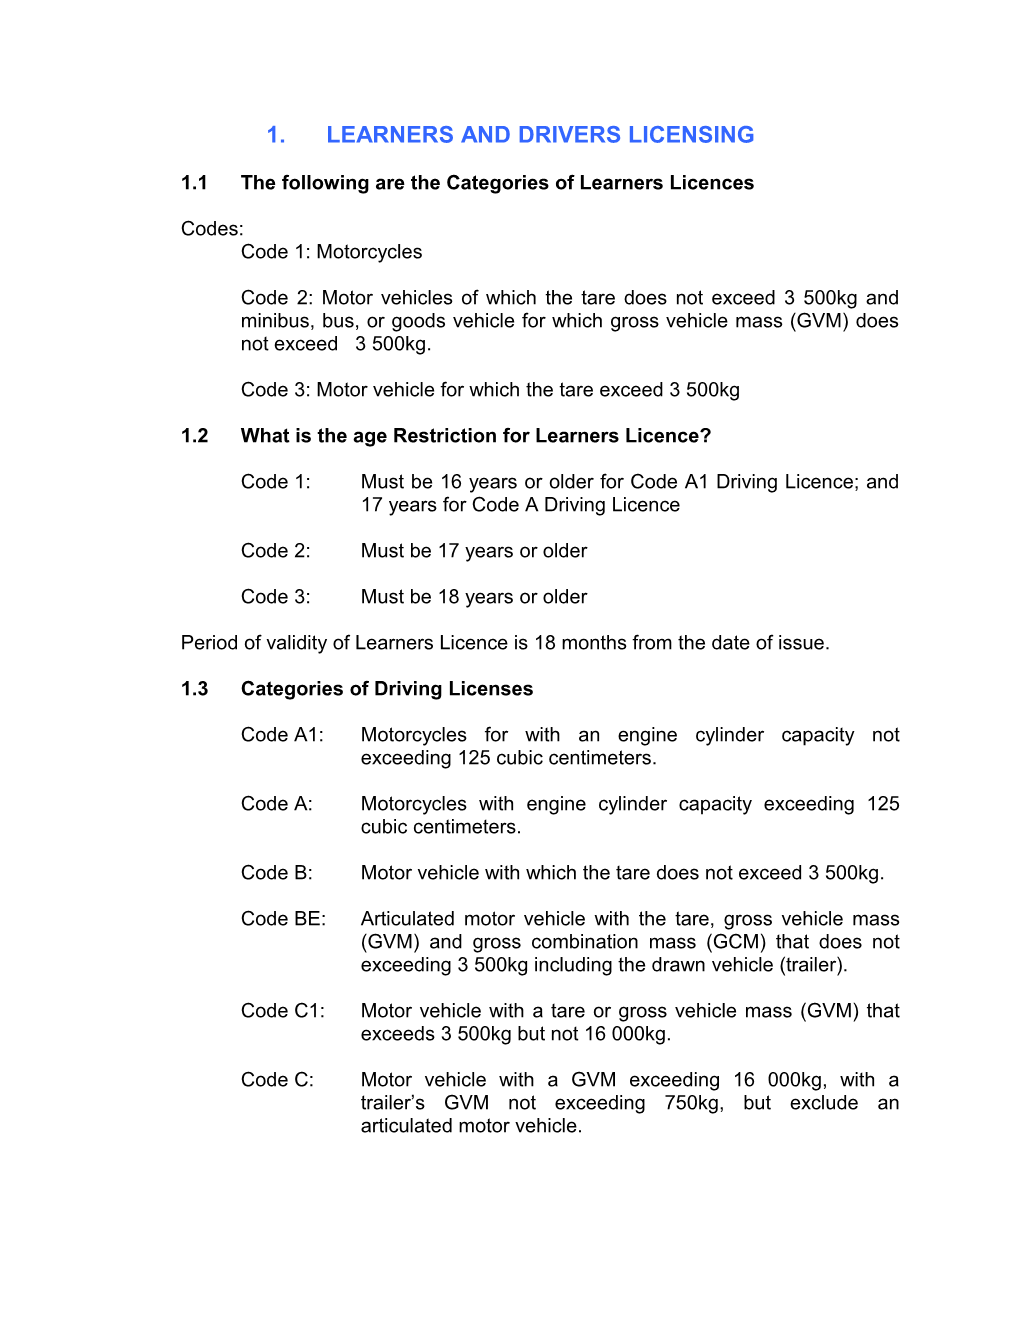 1.1 the Following Are the Categories of Learners Licences